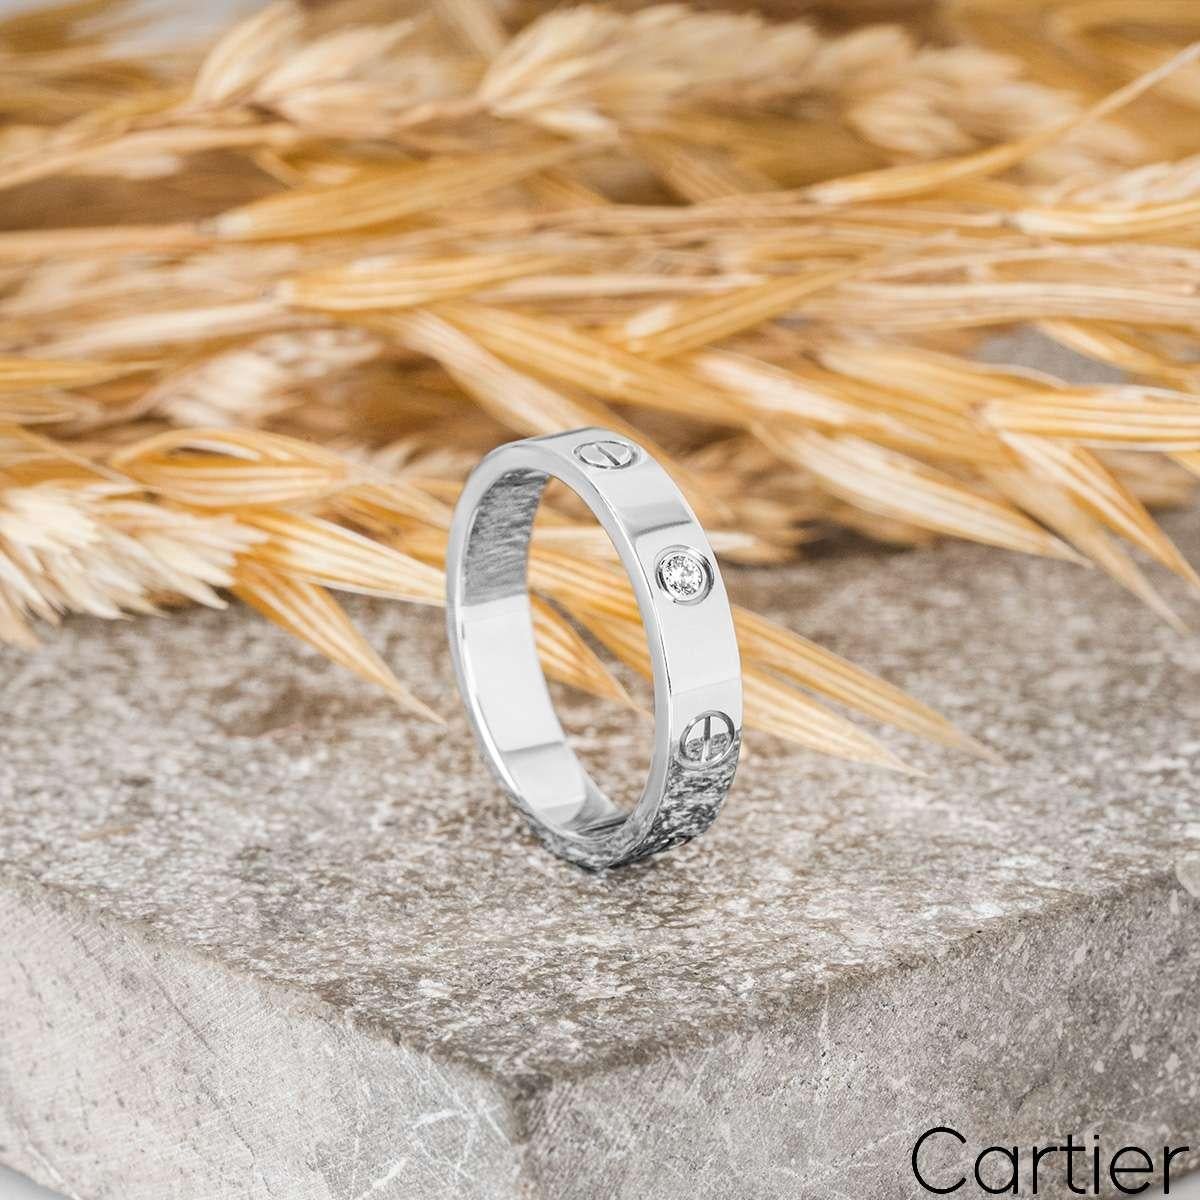 Cartier White Gold Diamond Love Wedding Band Size 48 B4050500 In Excellent Condition For Sale In London, GB